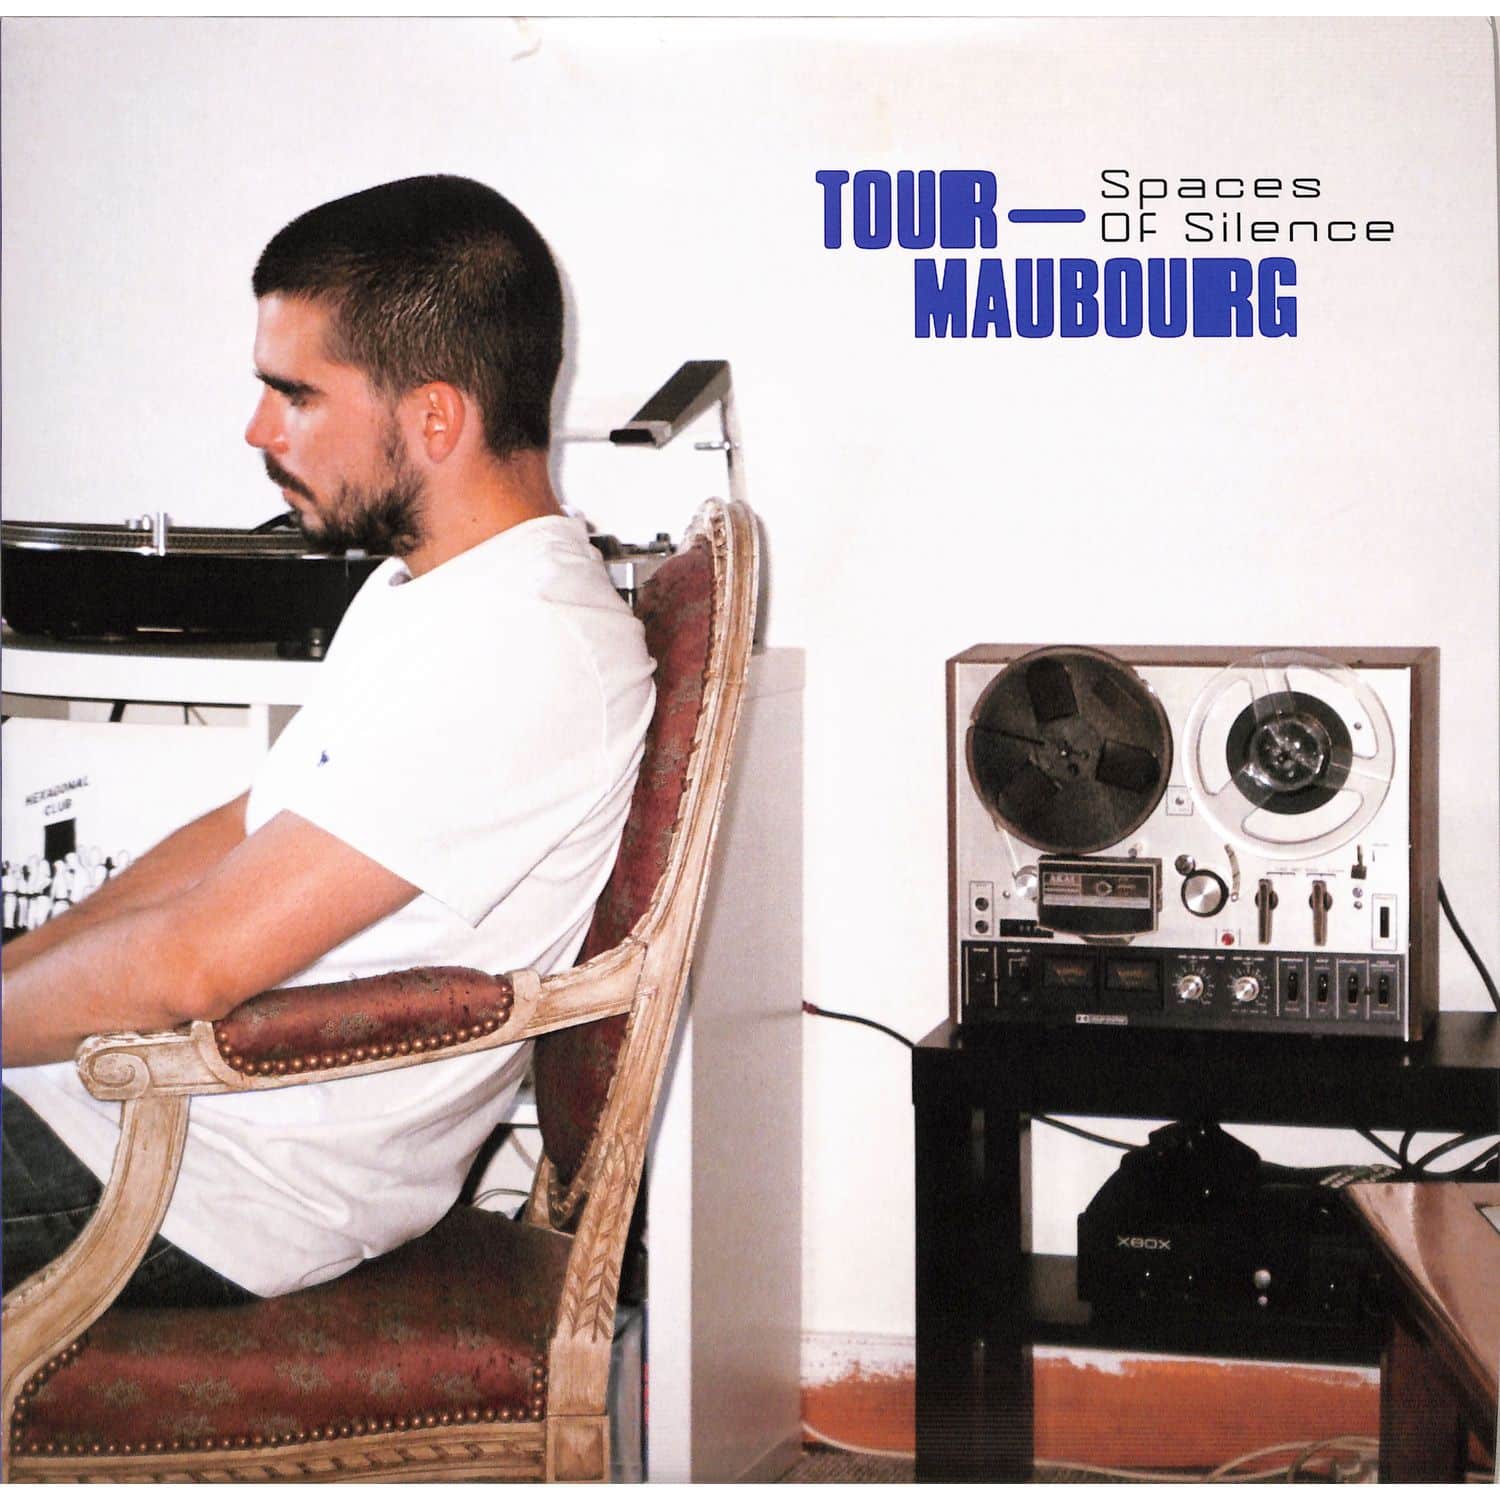 Tour-Maubourg - SPACES OF SILENCE 